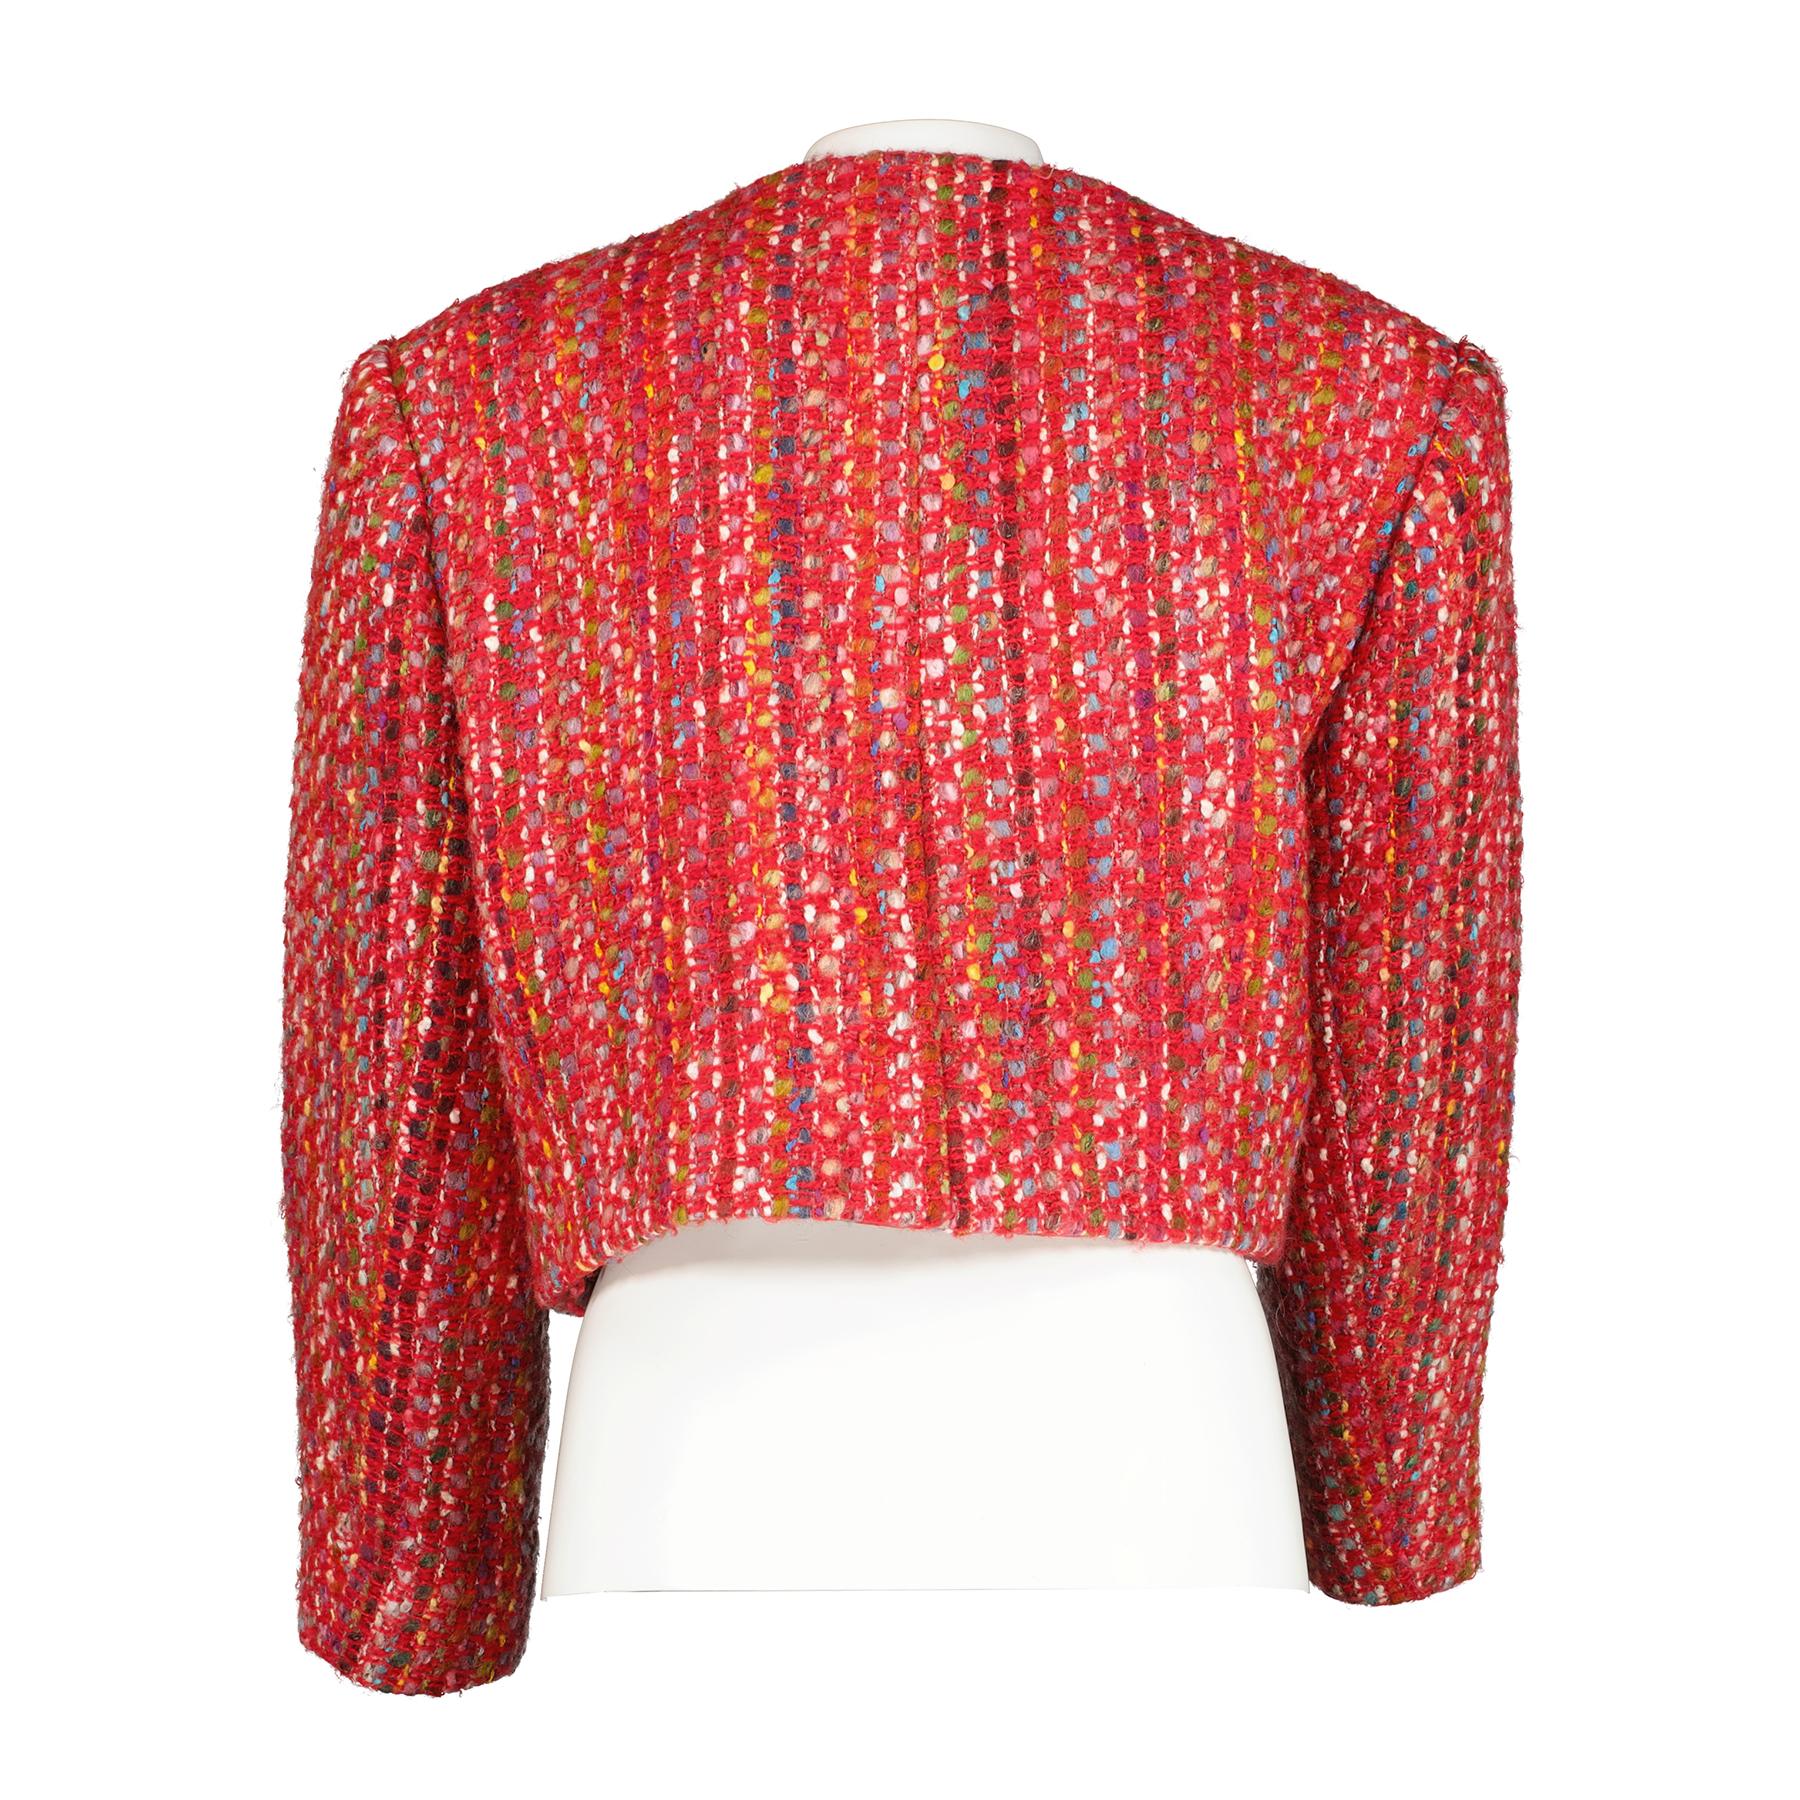 Celine Vintage Red Cropped Tweed Jacket - Size FR46

This exquisite Celine vintage jacket has been made from colourful tweed fabric with golden Triomphe chain buttons.

Composition:

75% wool
12% acrylic
13% cotton